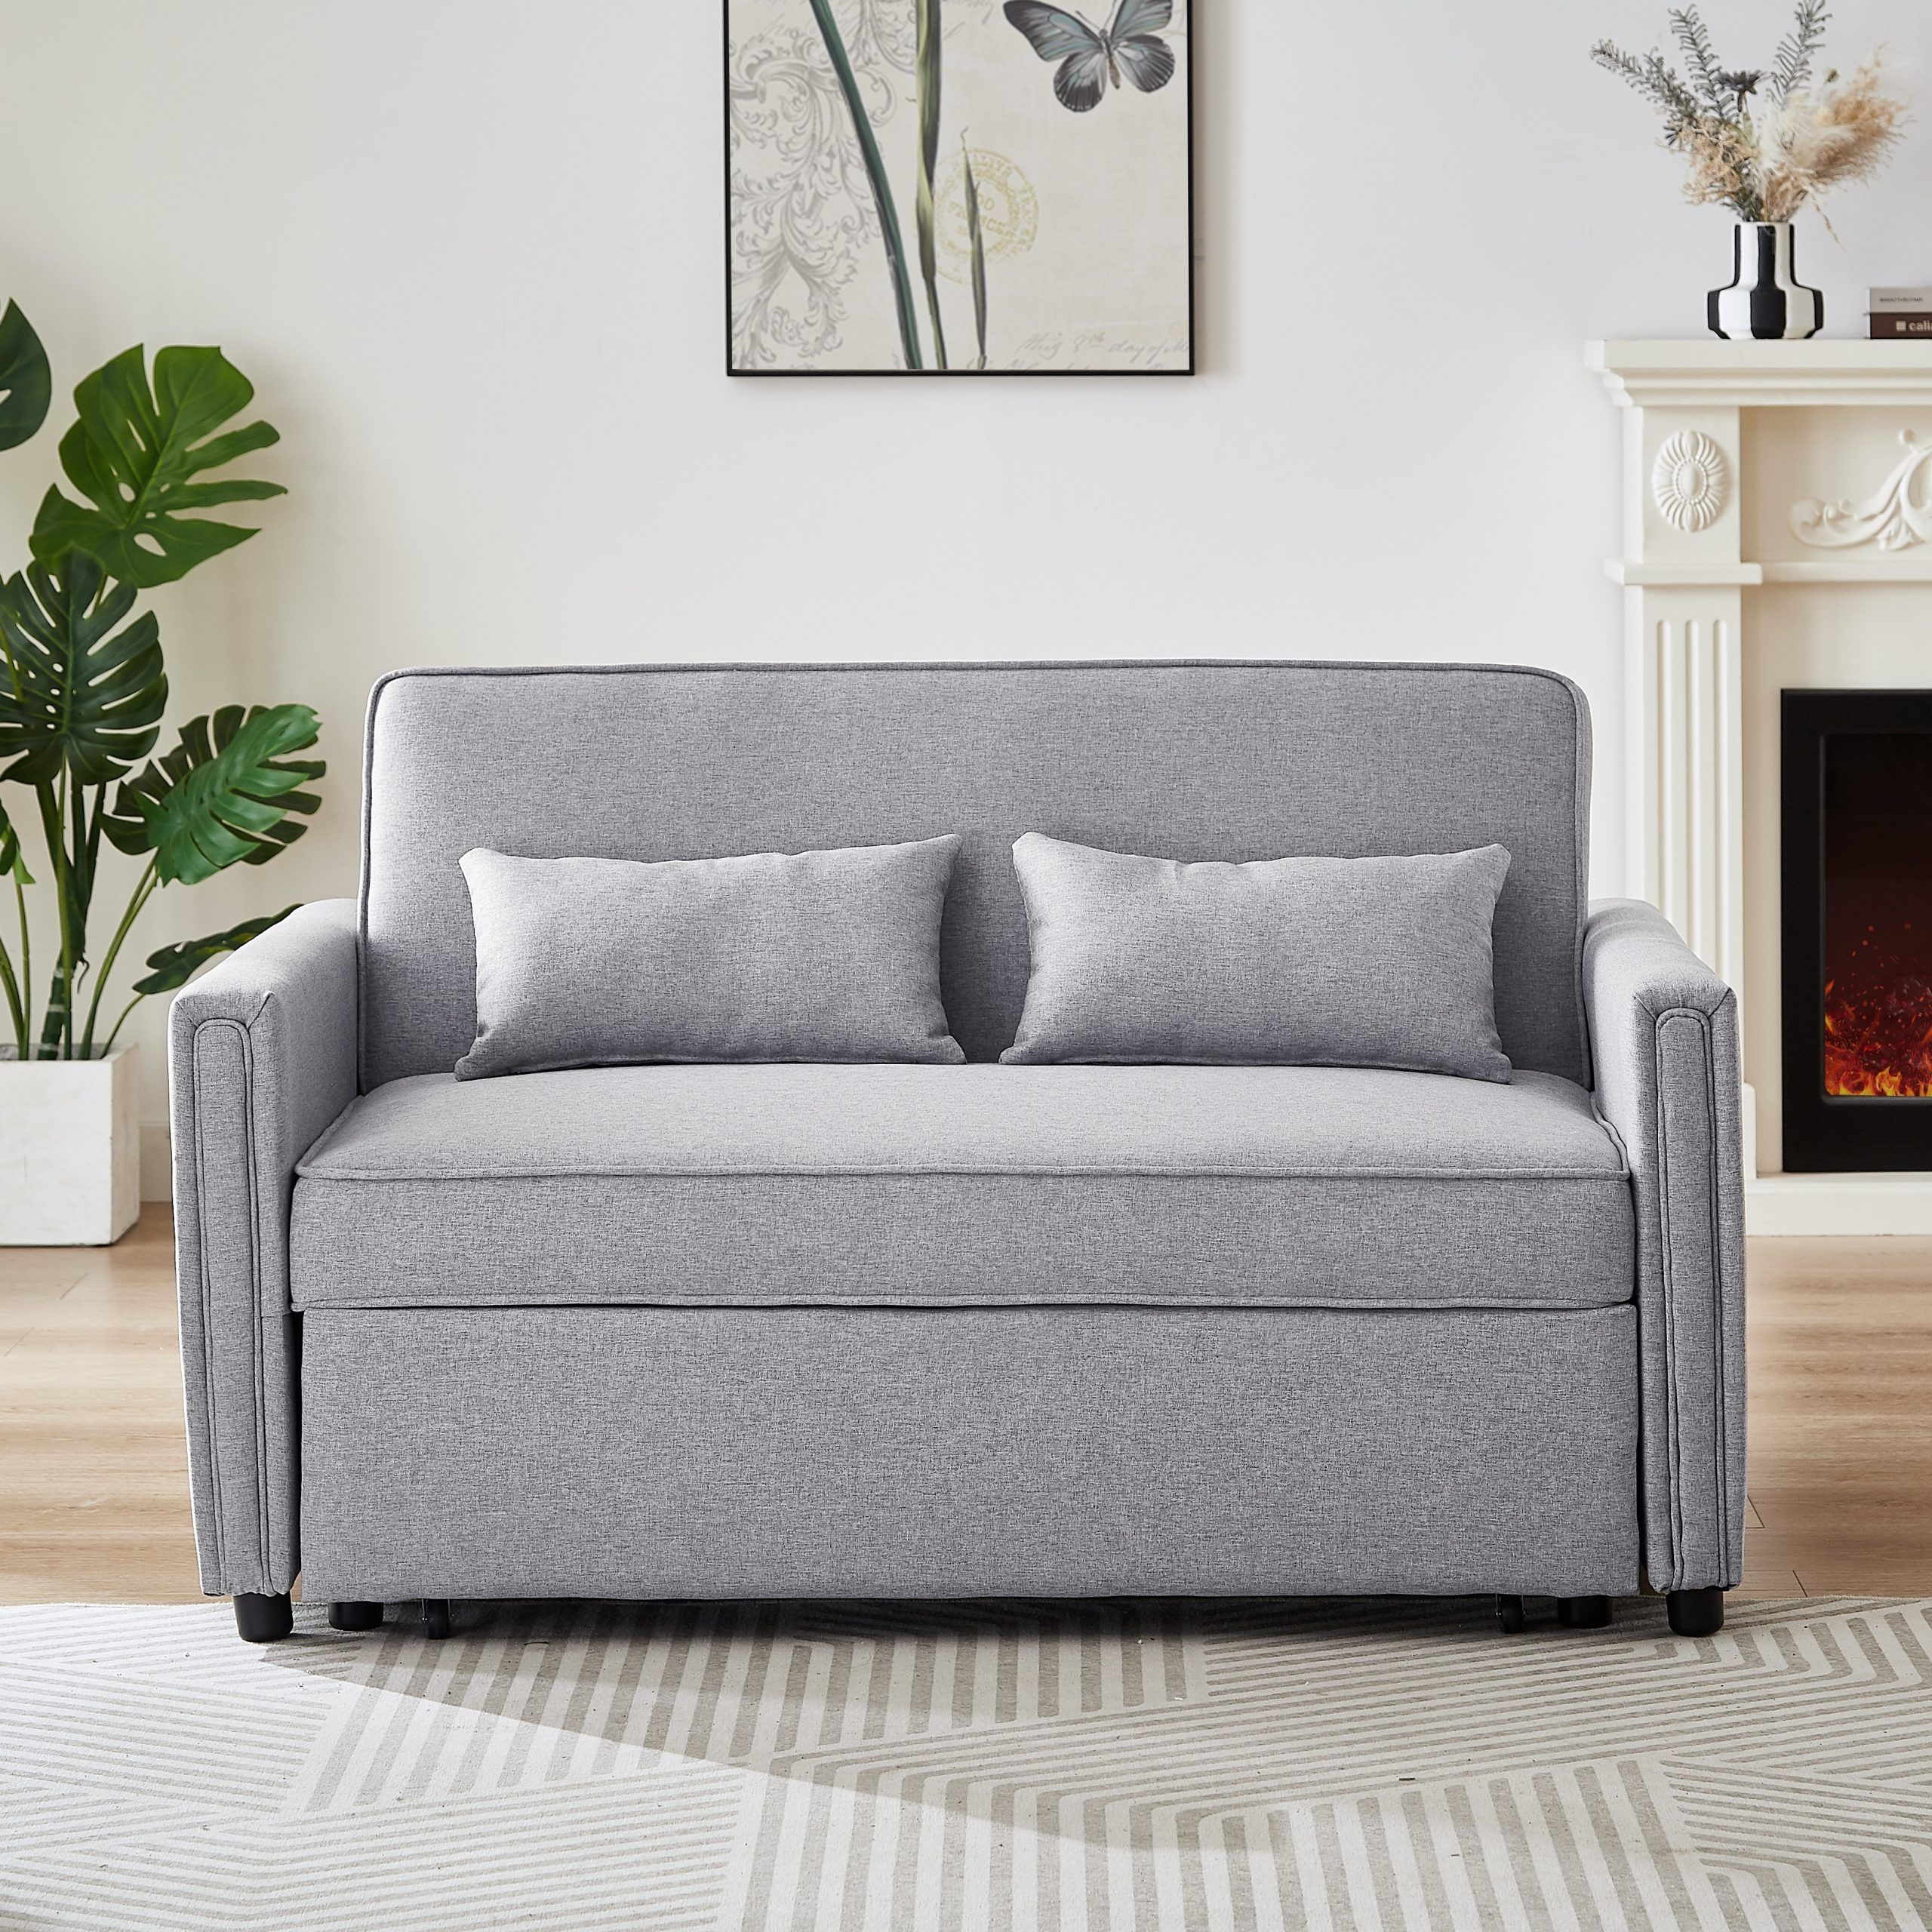 Linen Convertible Loveseat Sleeper Sofa Couch With Adjustable Backrest –  Bed Bath & Beyond – 38369360 Regarding Convertible Gray Loveseat Sleepers (View 14 of 15)